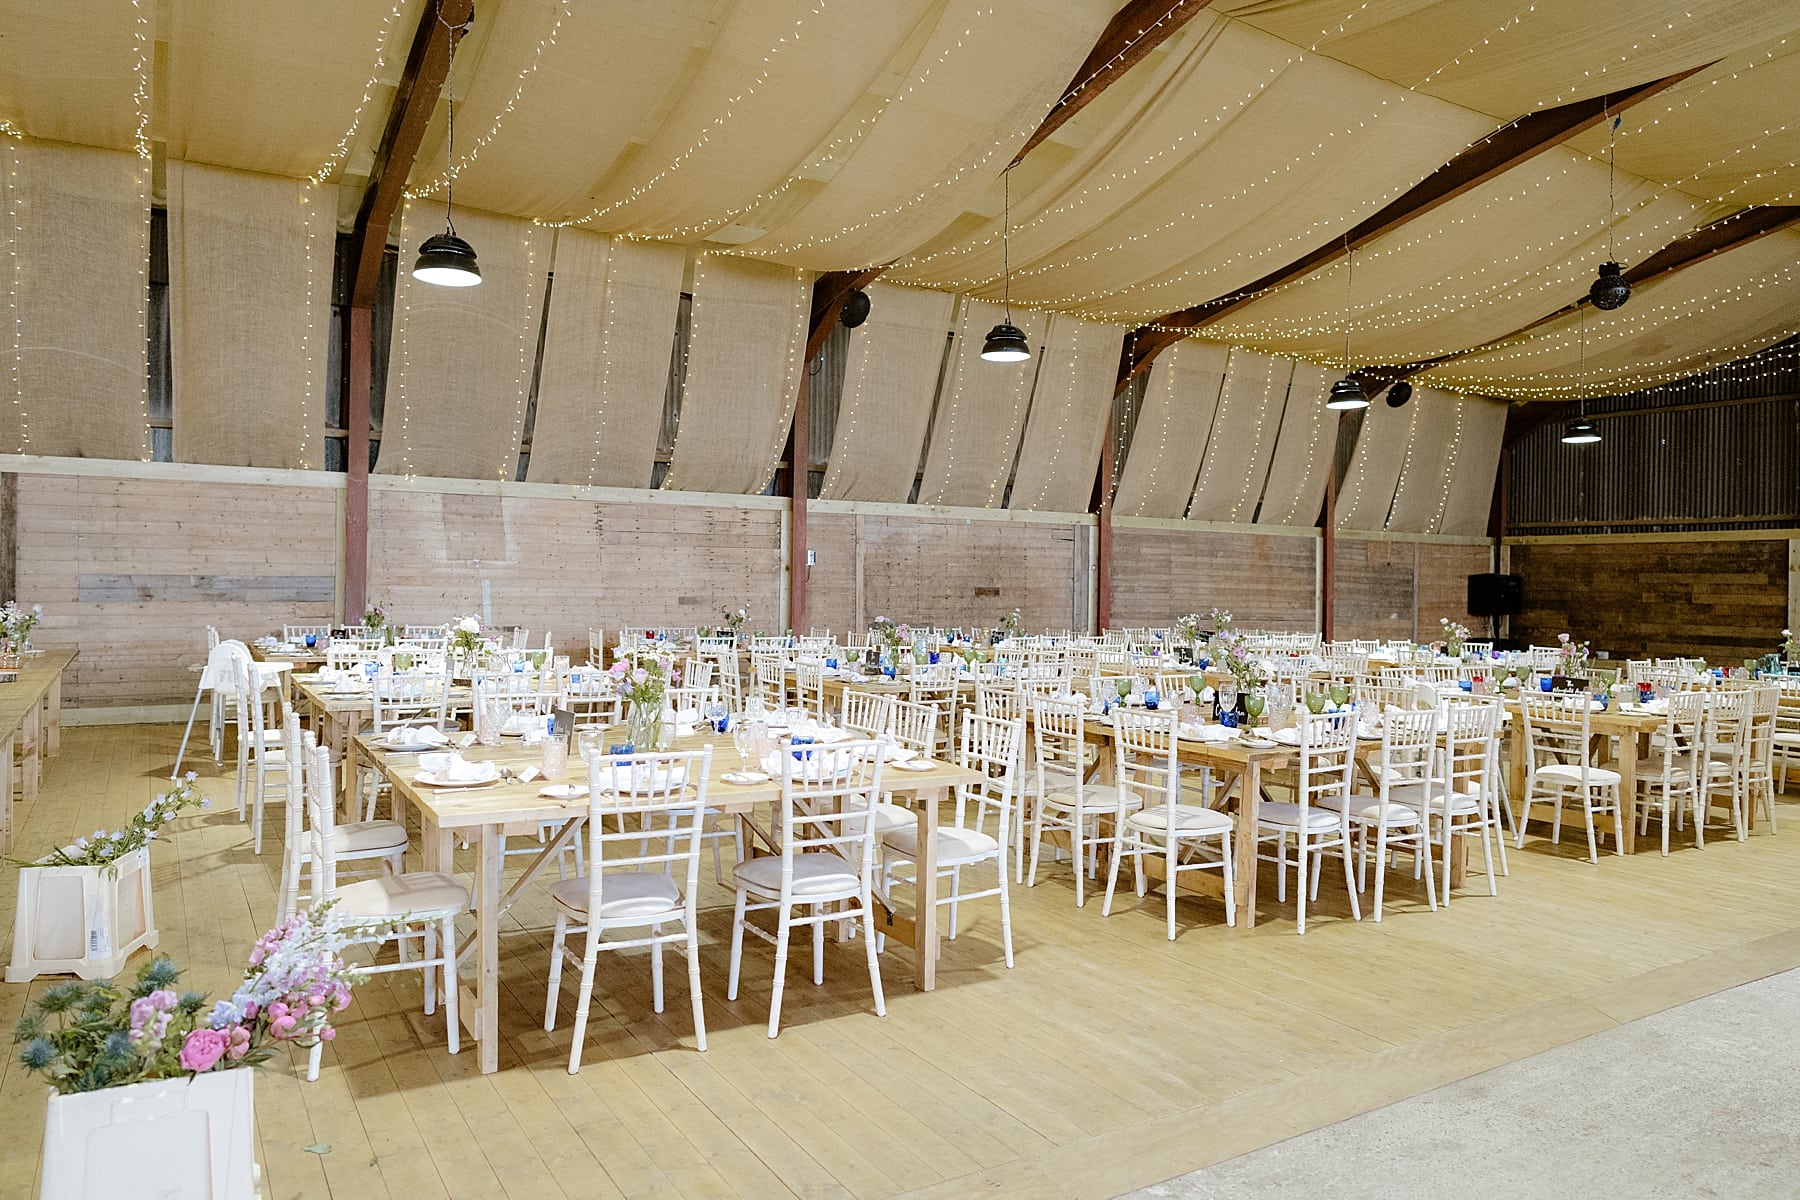 the den at culross wedding reception inside barn with banquet tables with flowers and white chairs